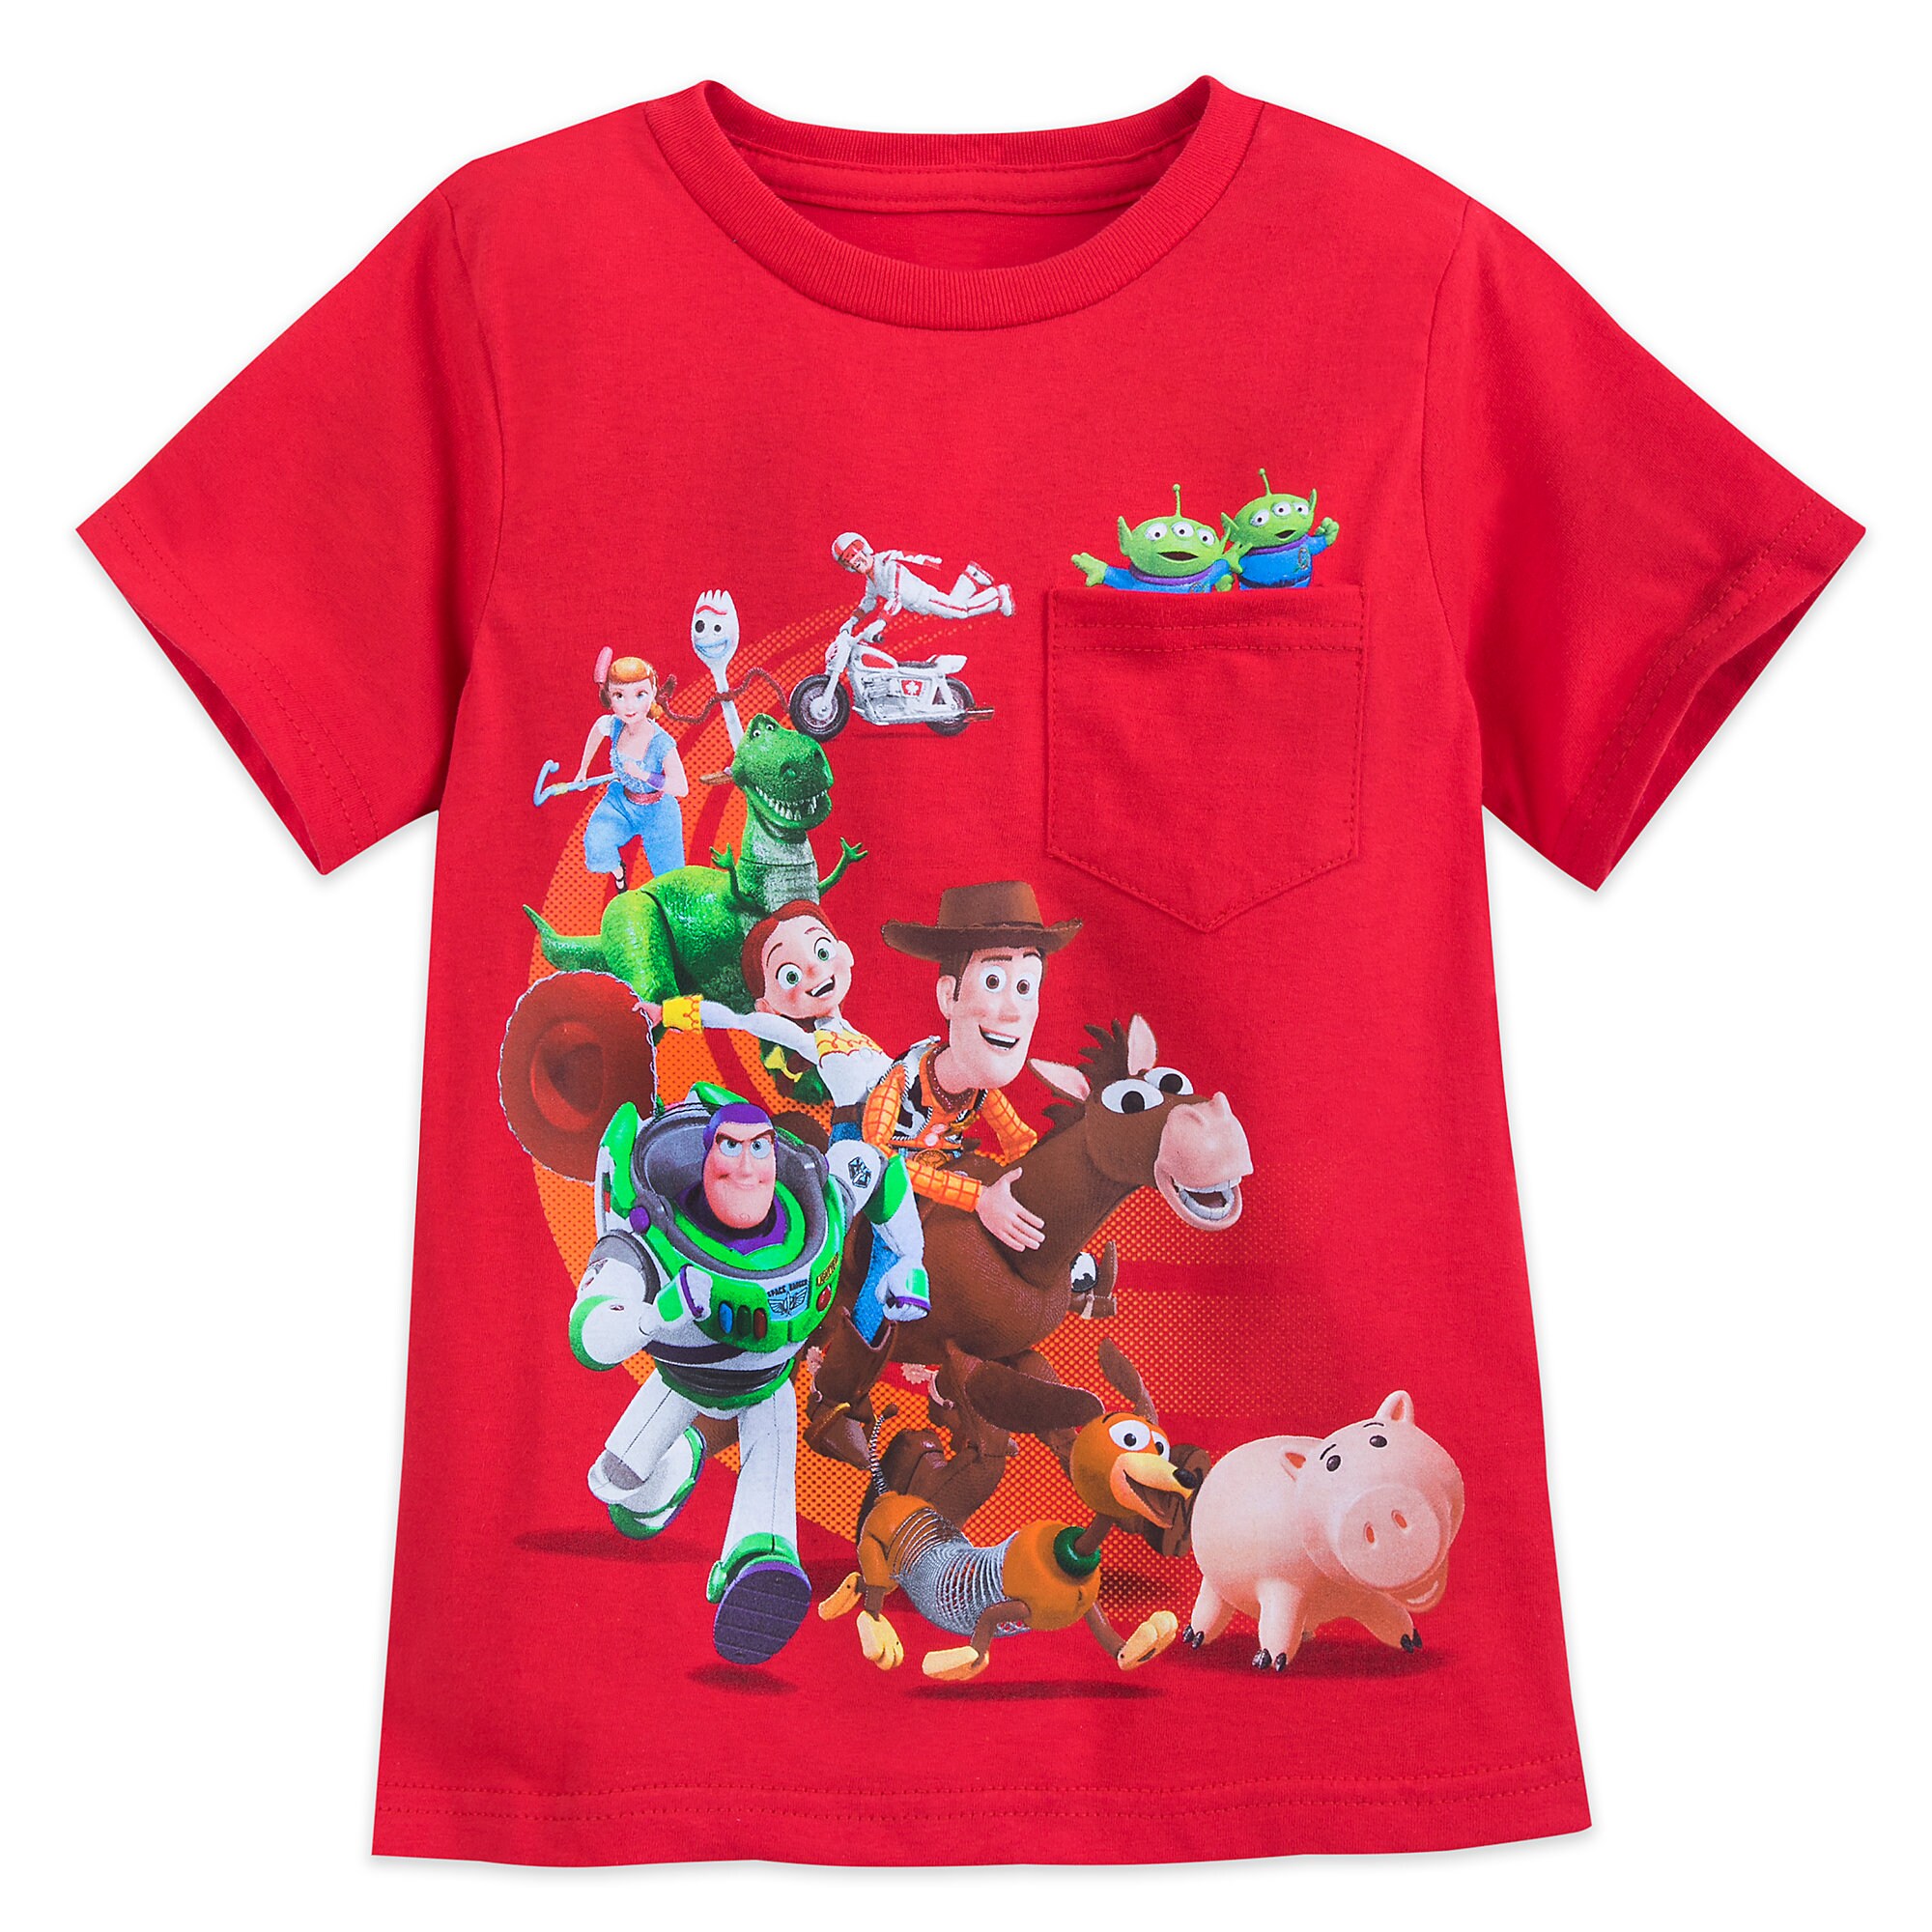 Toy Story 4 Cast T-Shirt for Boys